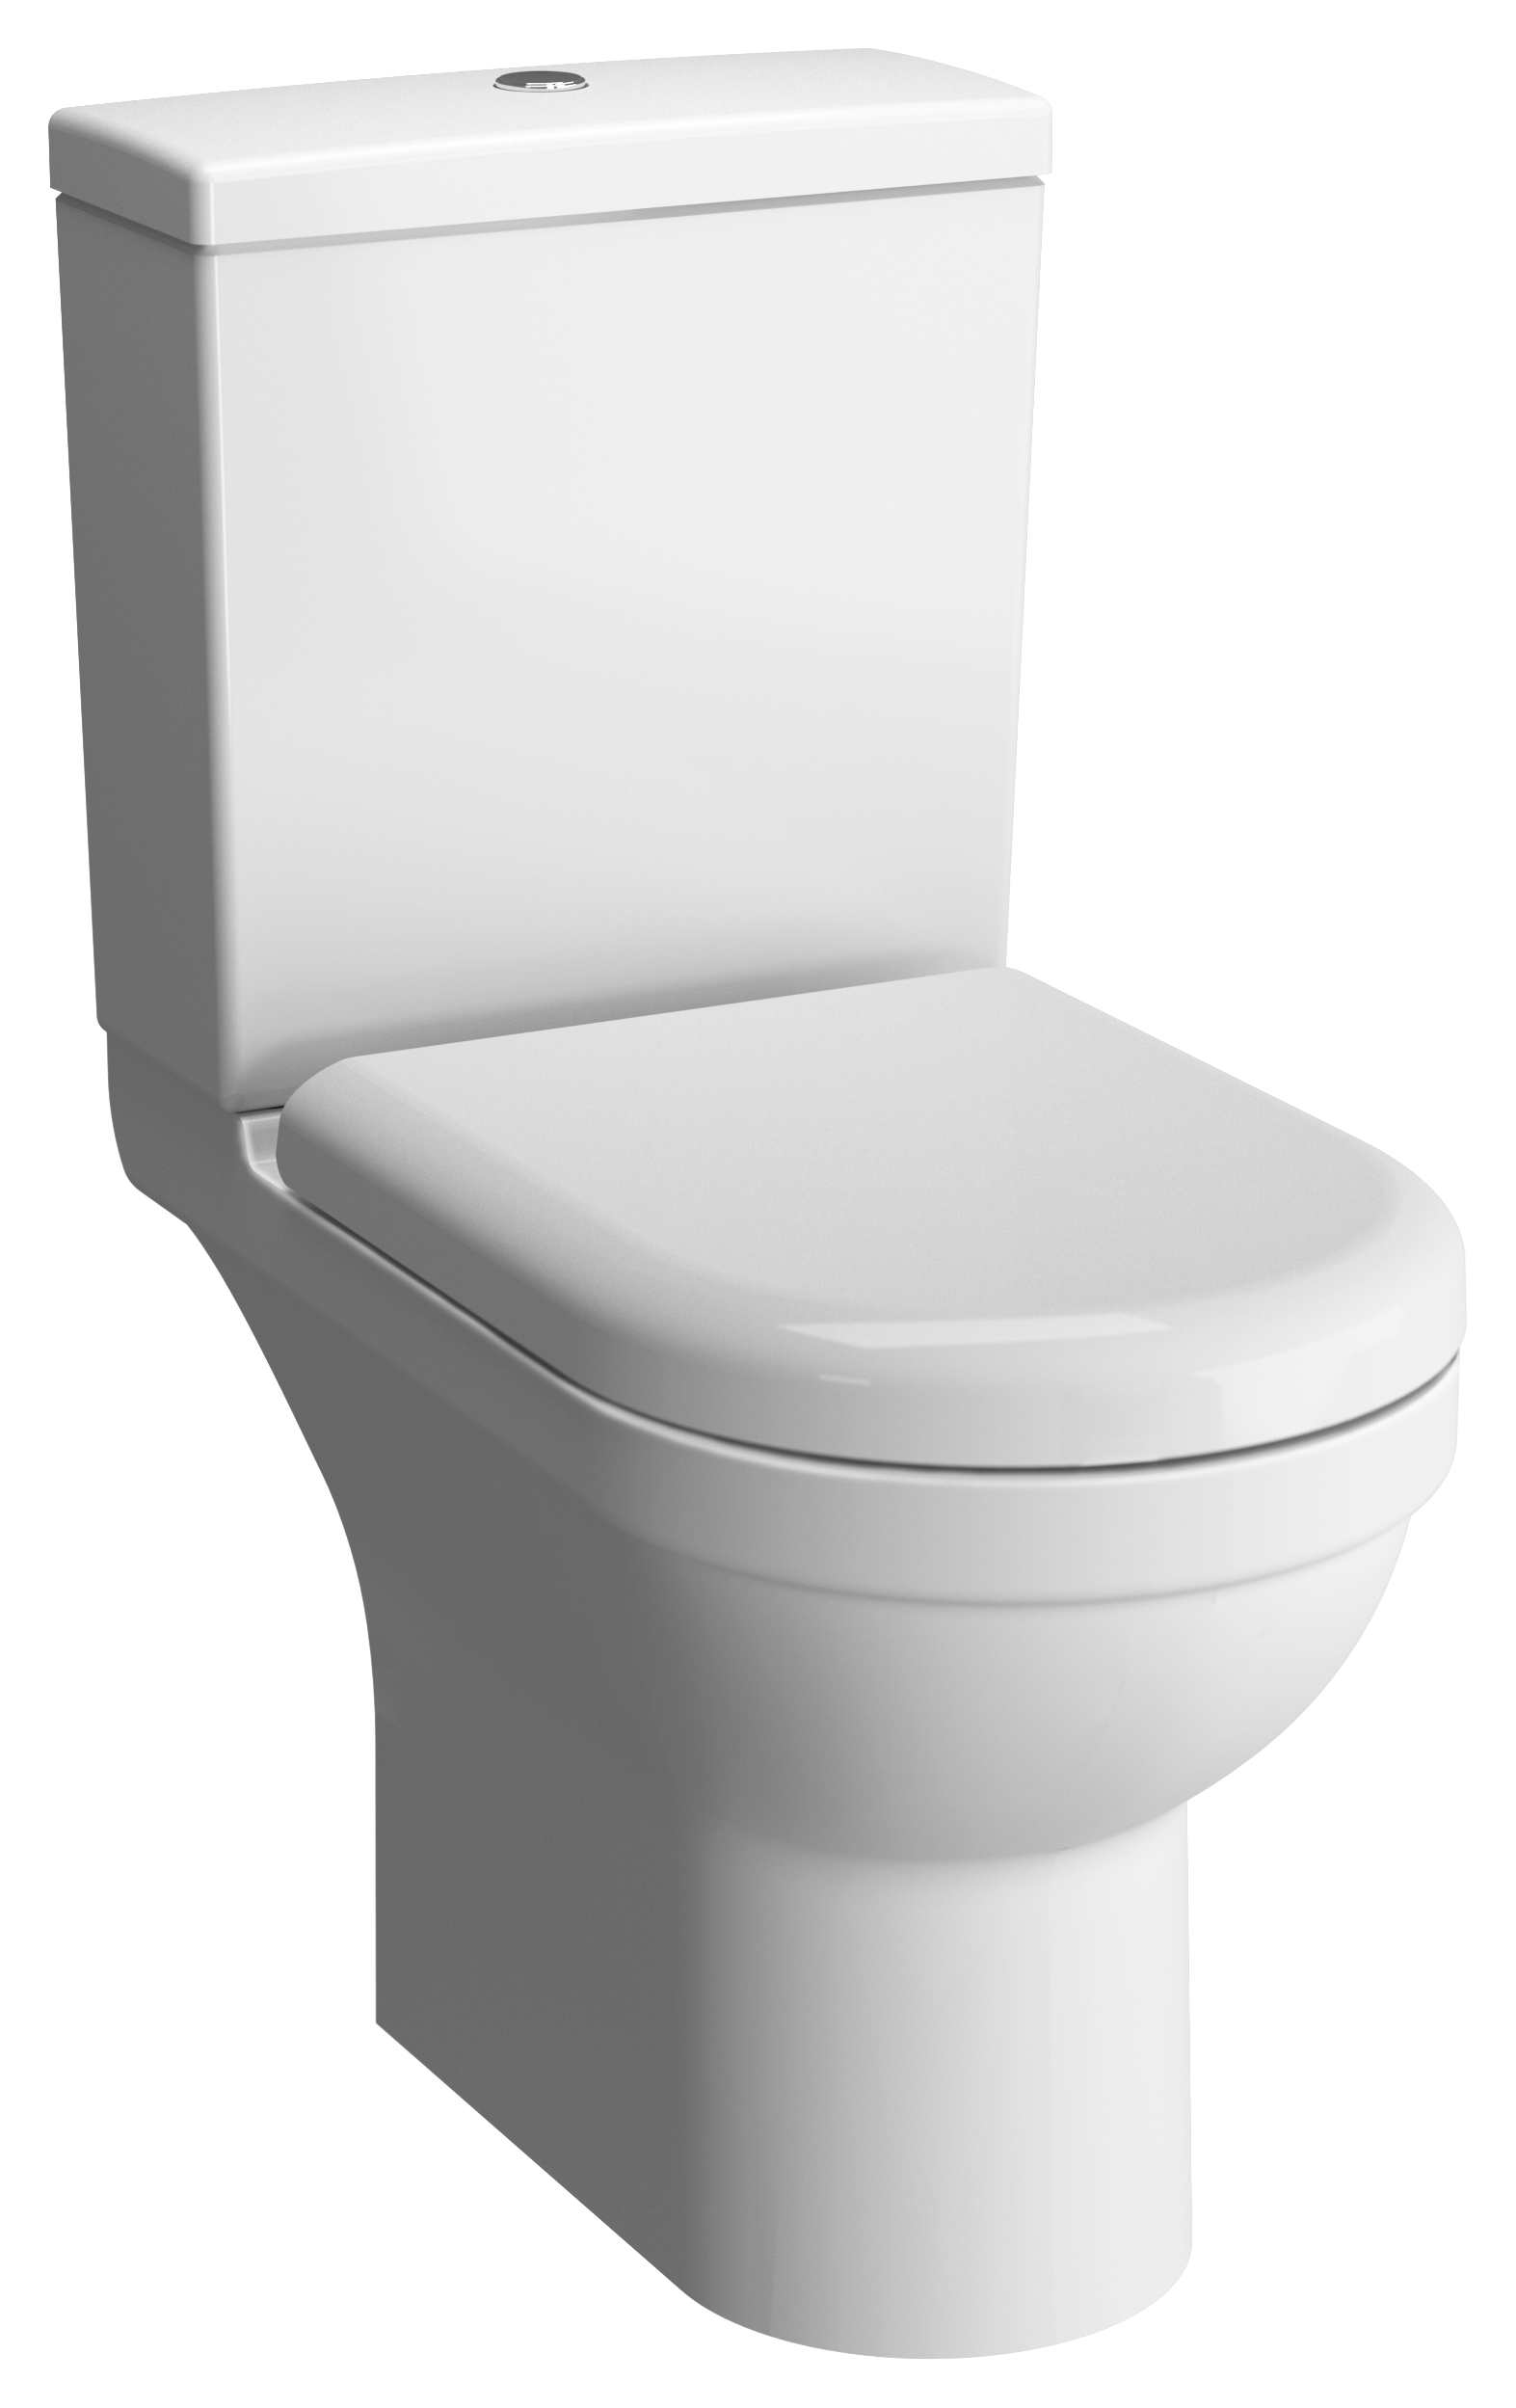 Image of VitrA Chennai Easy Clean Close Coupled Toilet Pan, Cistern & Soft Close Seat